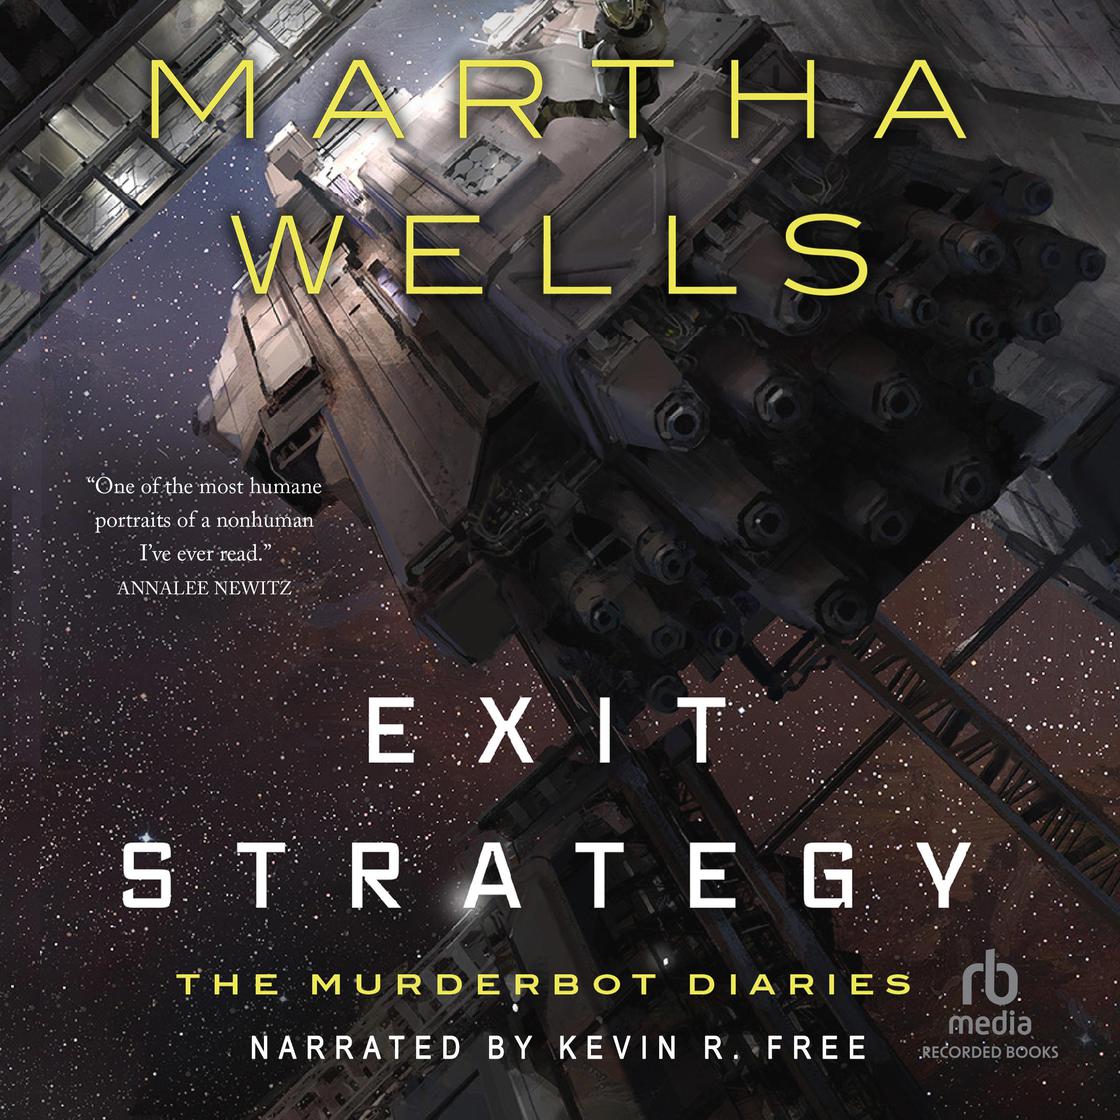 Martha Wells: Exit Strategy (AudiobookFormat, 2018, Recorded Books, Inc.)